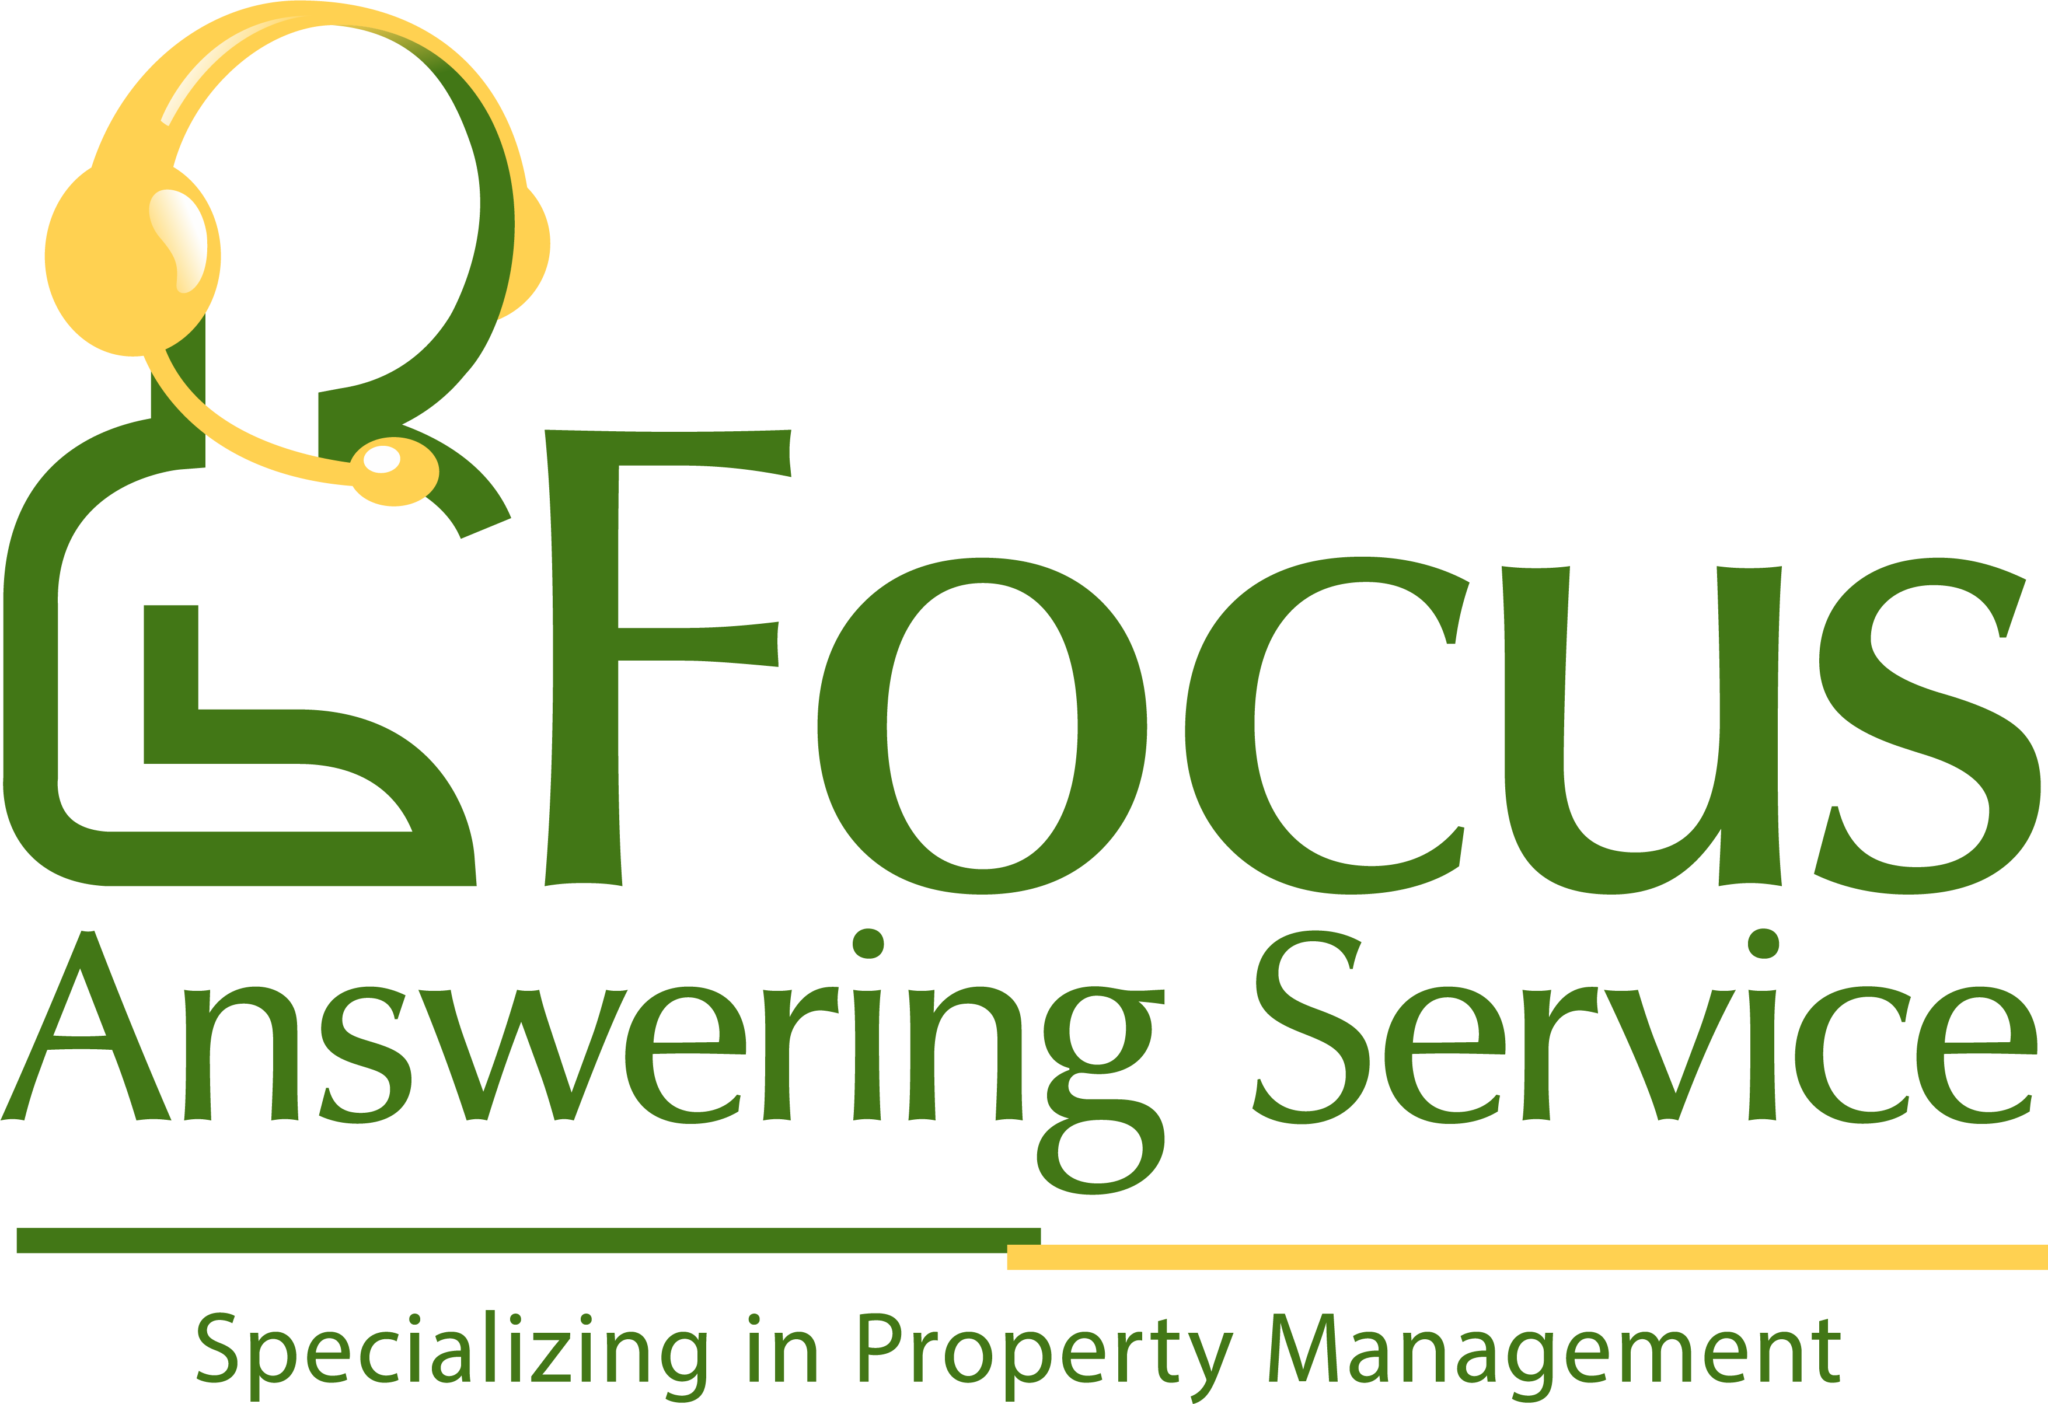 Top Answering Services For Property Management Melbourne thumbnail